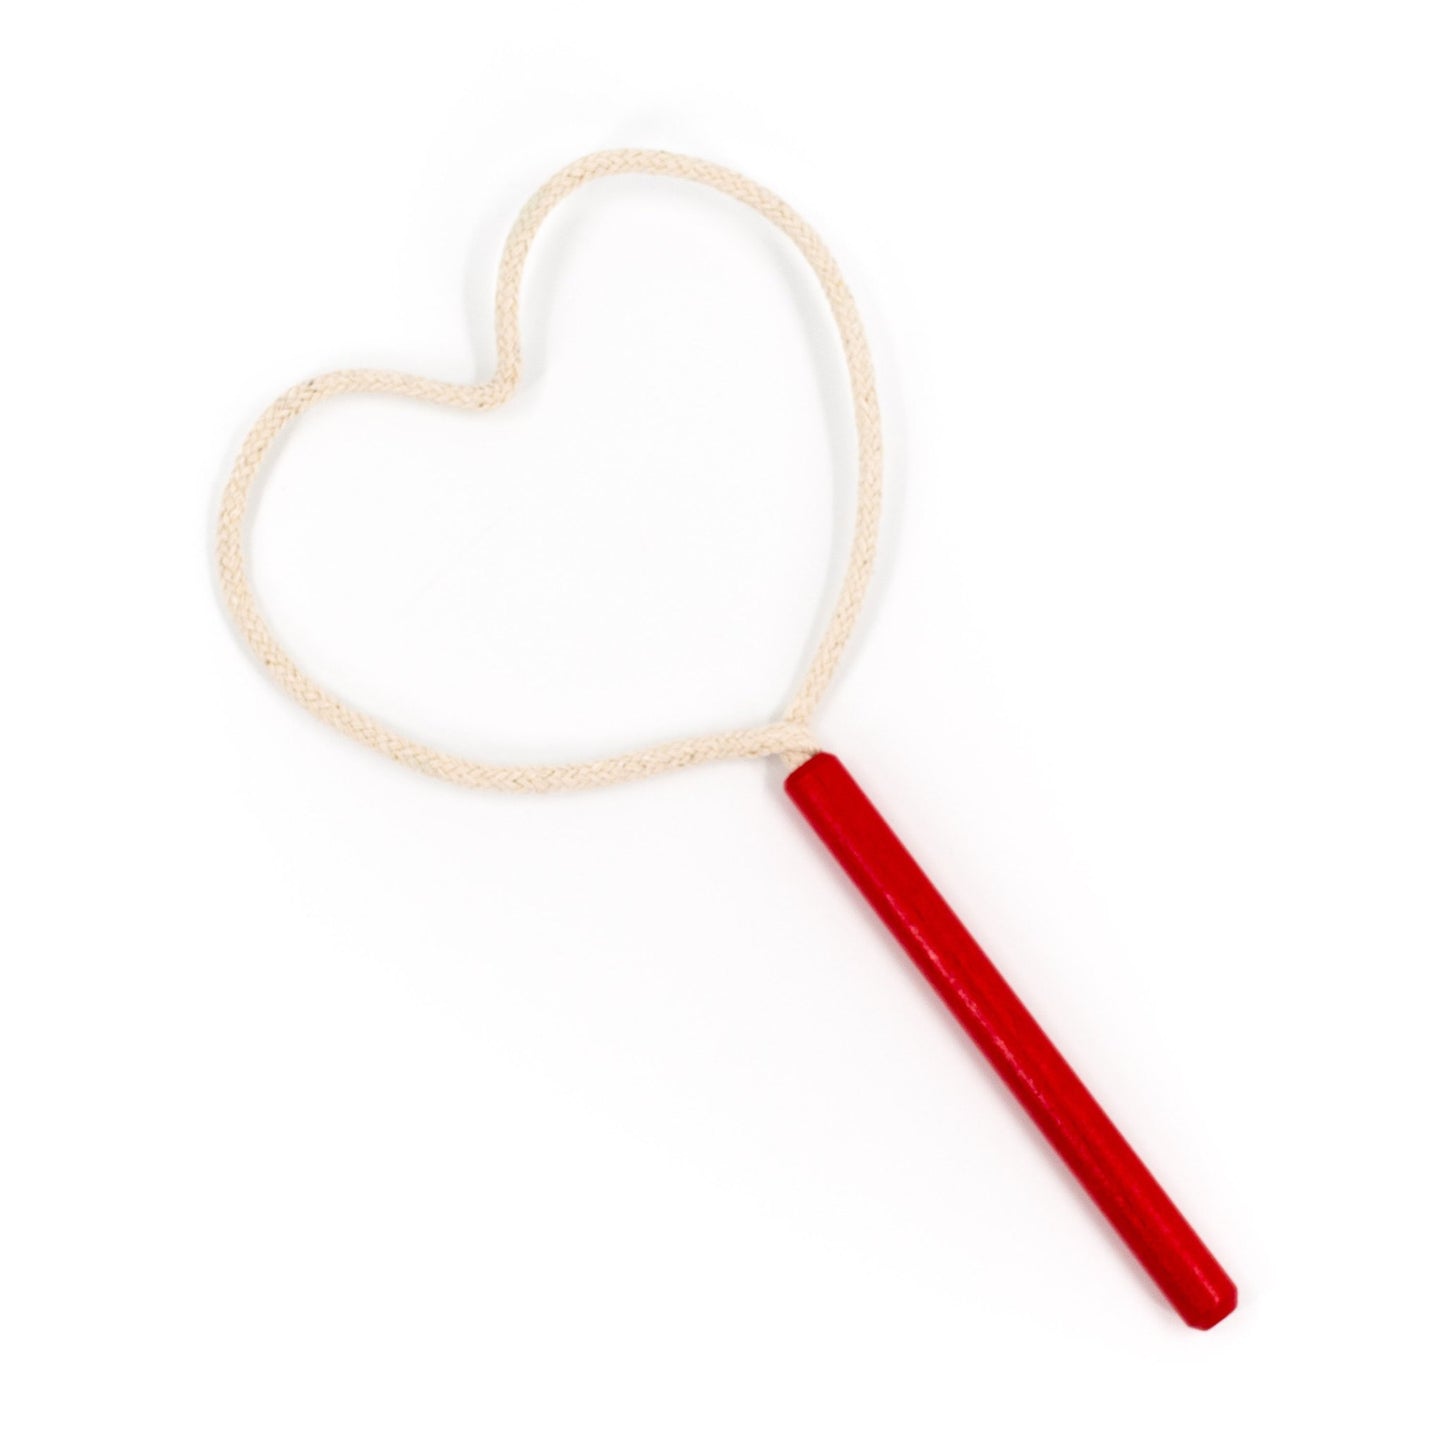 Dr. Zigs Wooden Bubble Hand Wand